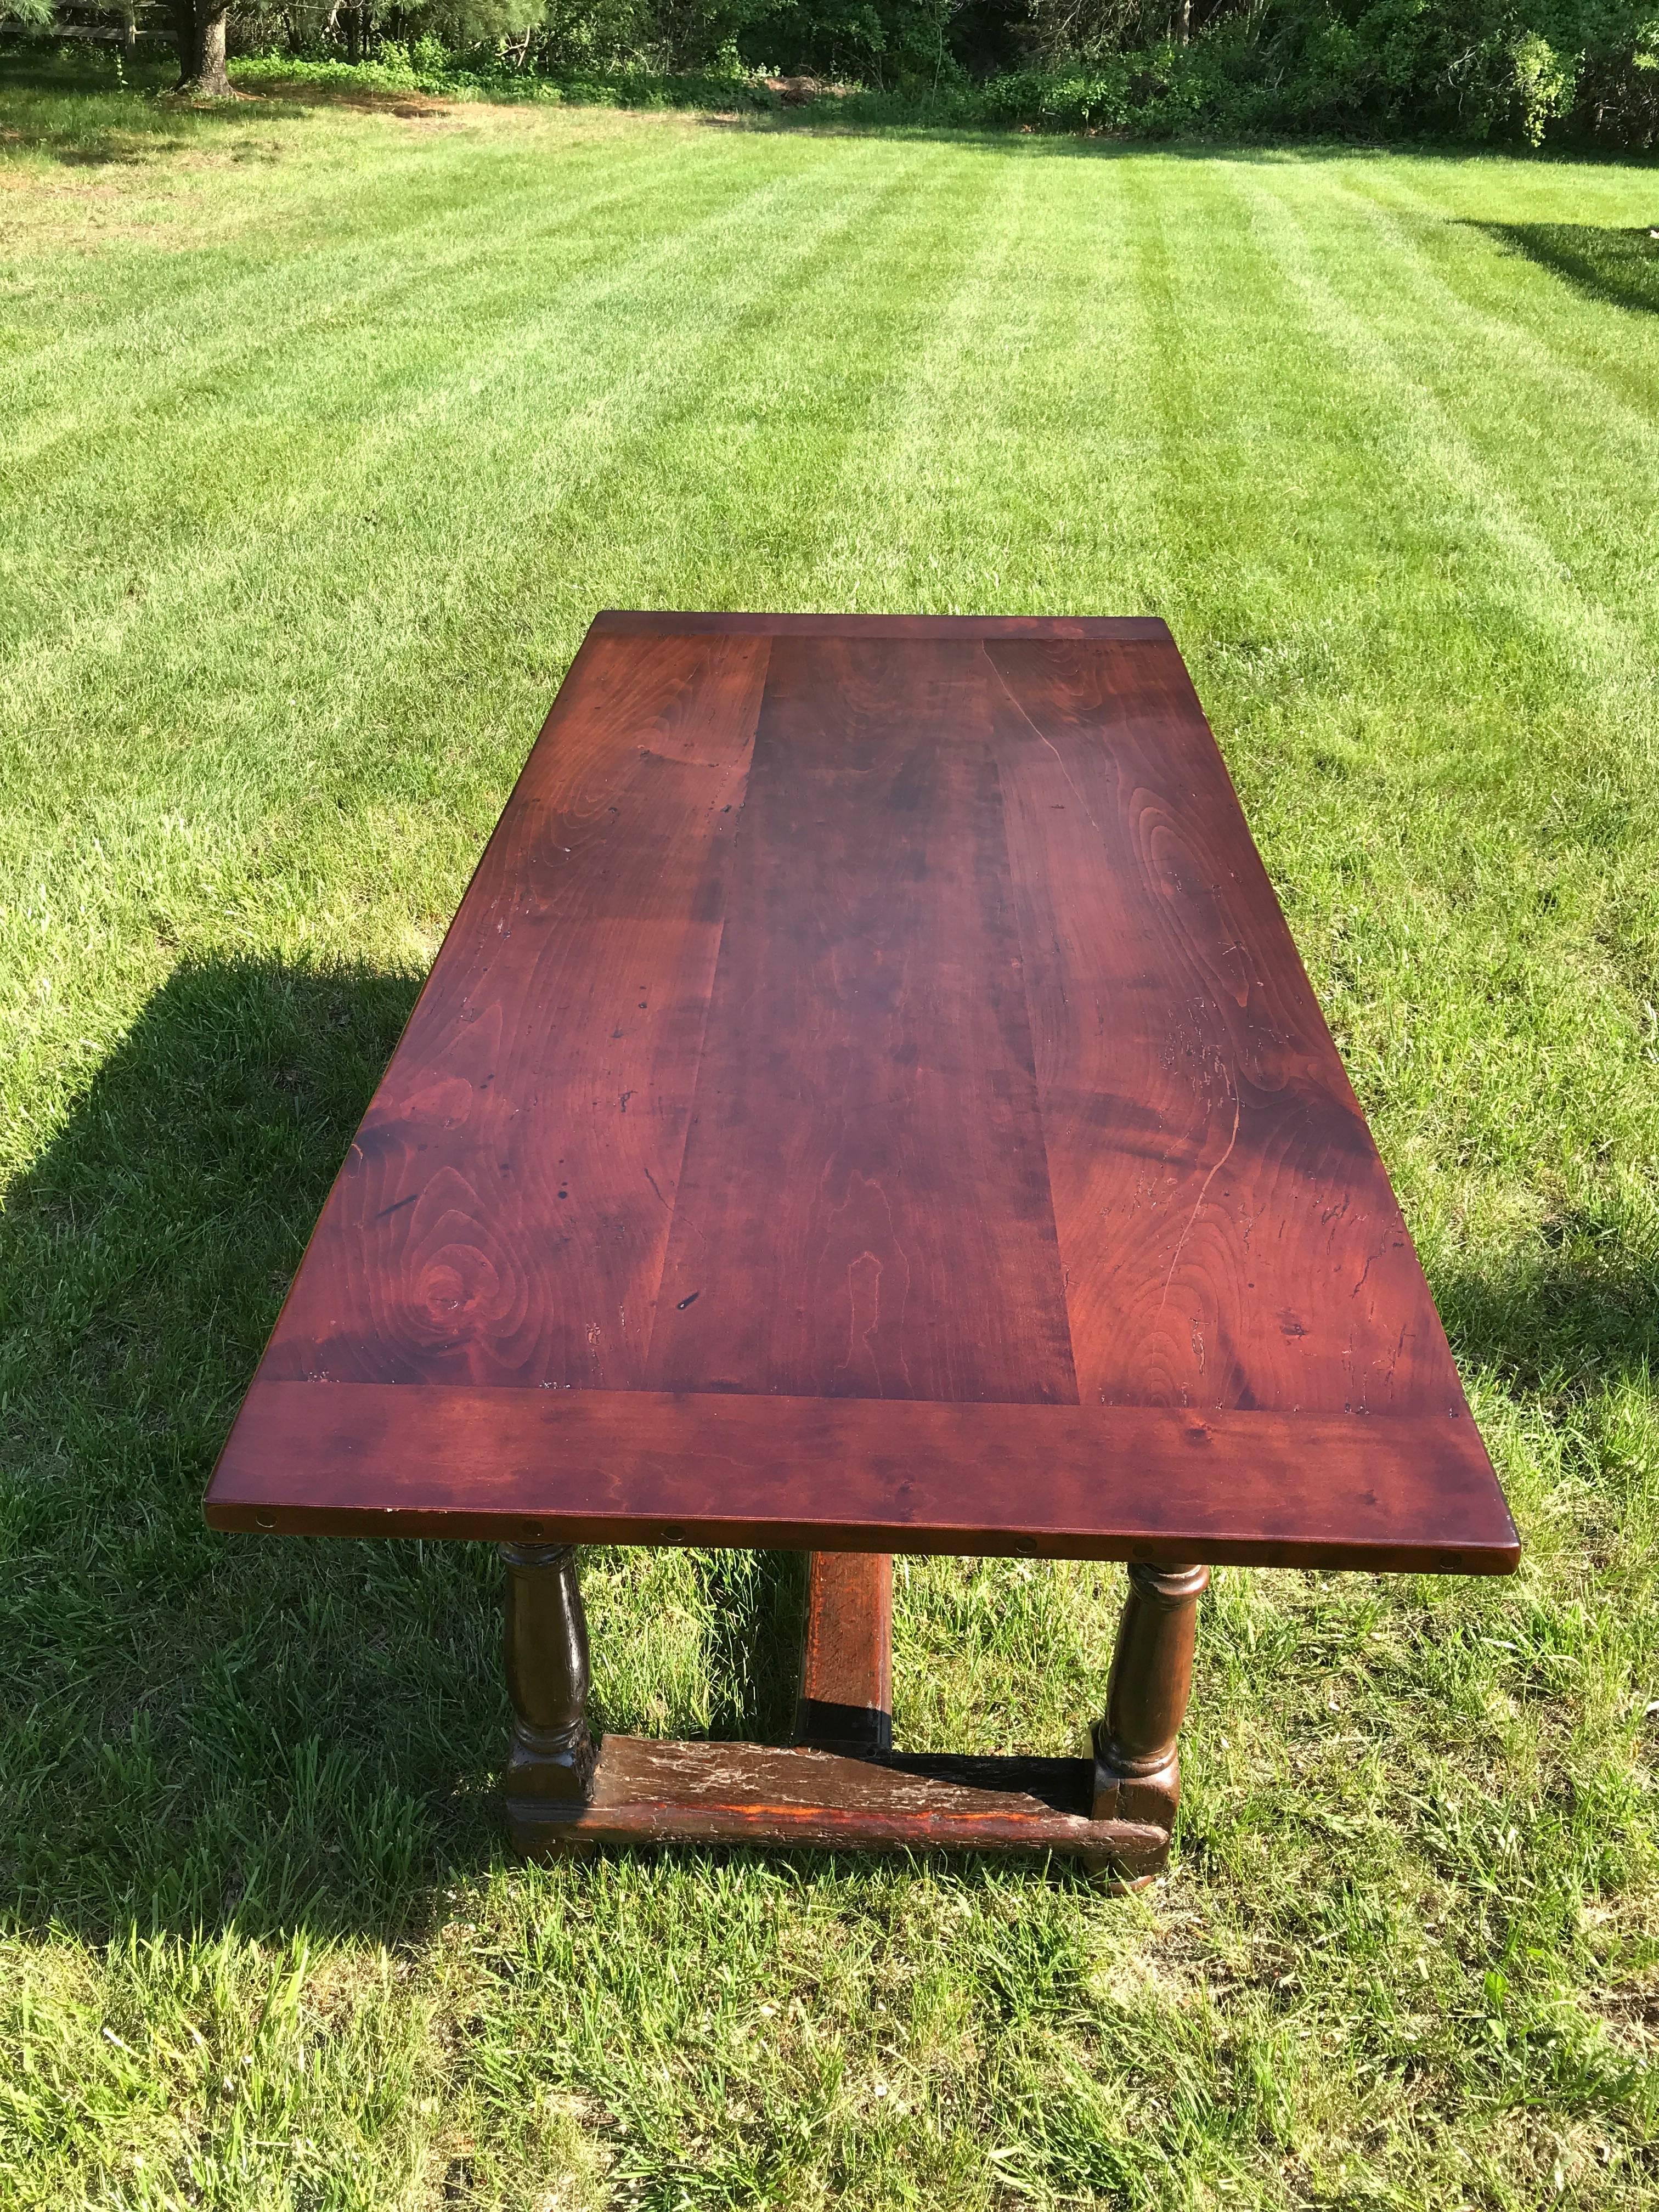 English tavern table, late 18th century. Walnut trestle, turned leg base with a cherry, bread board top. Functional drawers at both ends, one affixed with a wooden knob and other with a metal ring pull. Table top recently repaired and refinished,